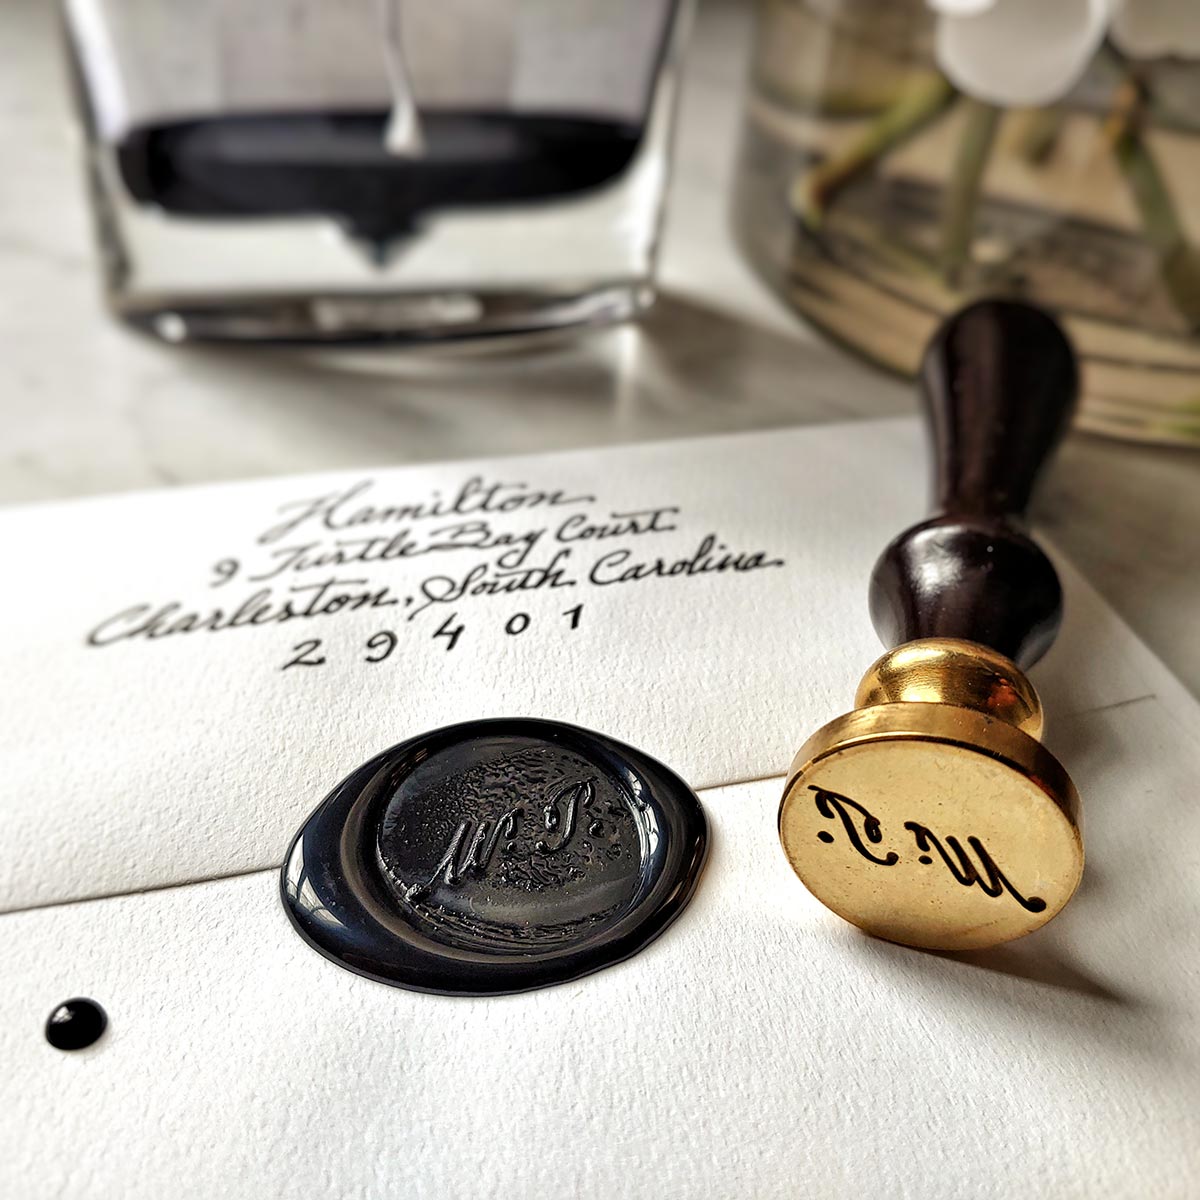 Custom Wax Seal Stamp - 26 Letter Custom Floral Name Wax Seal Stamp - P